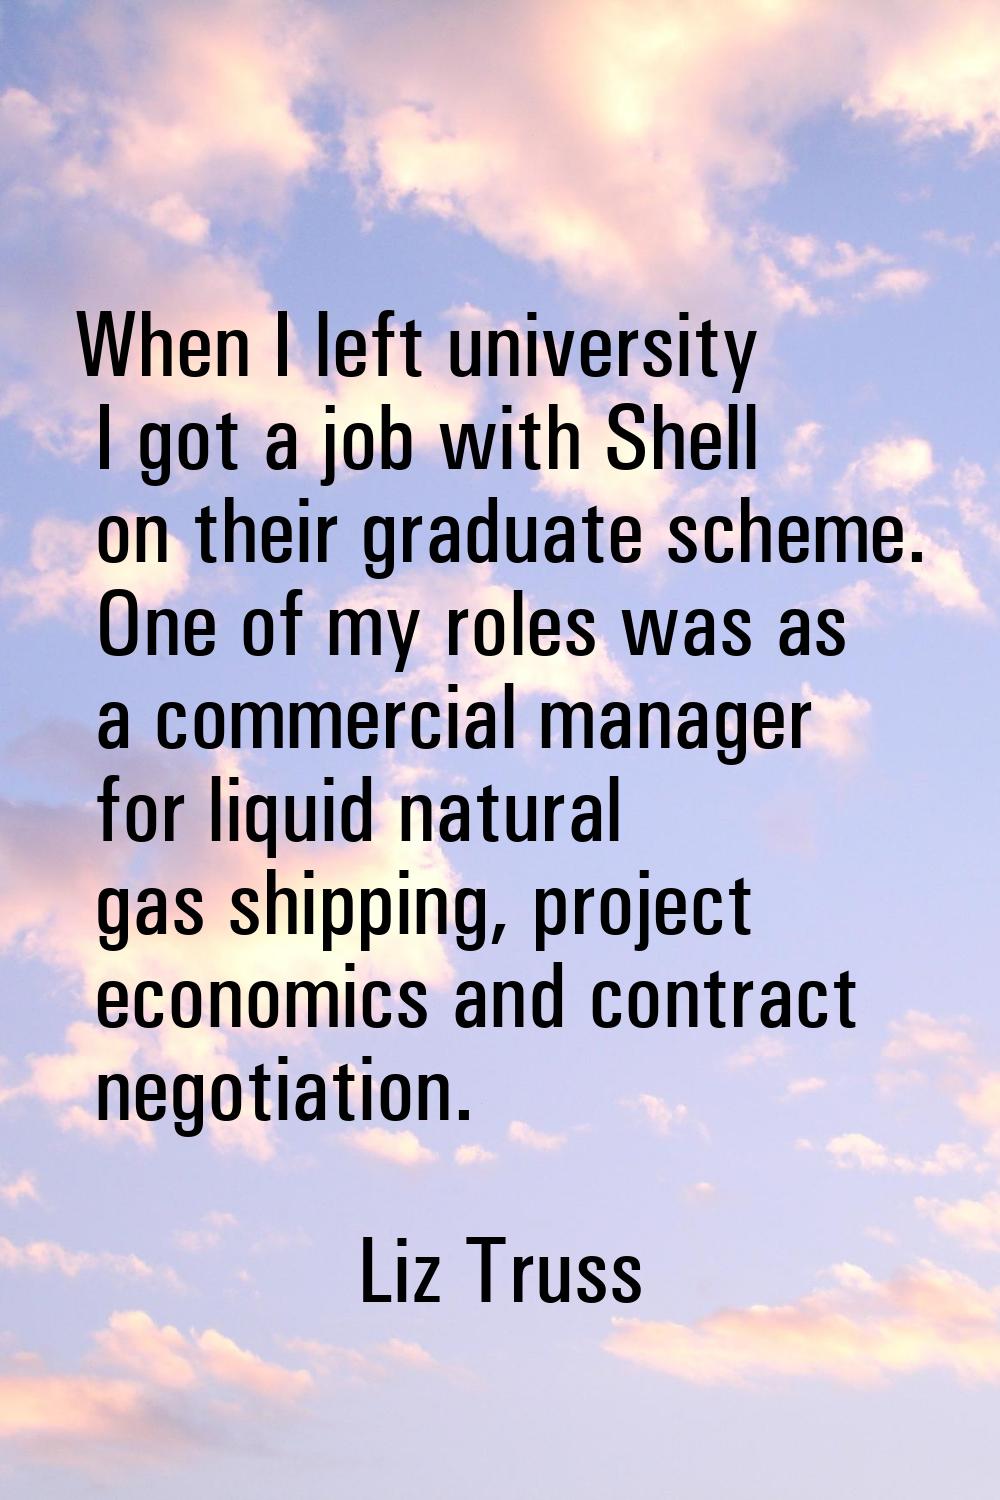 When I left university I got a job with Shell on their graduate scheme. One of my roles was as a co